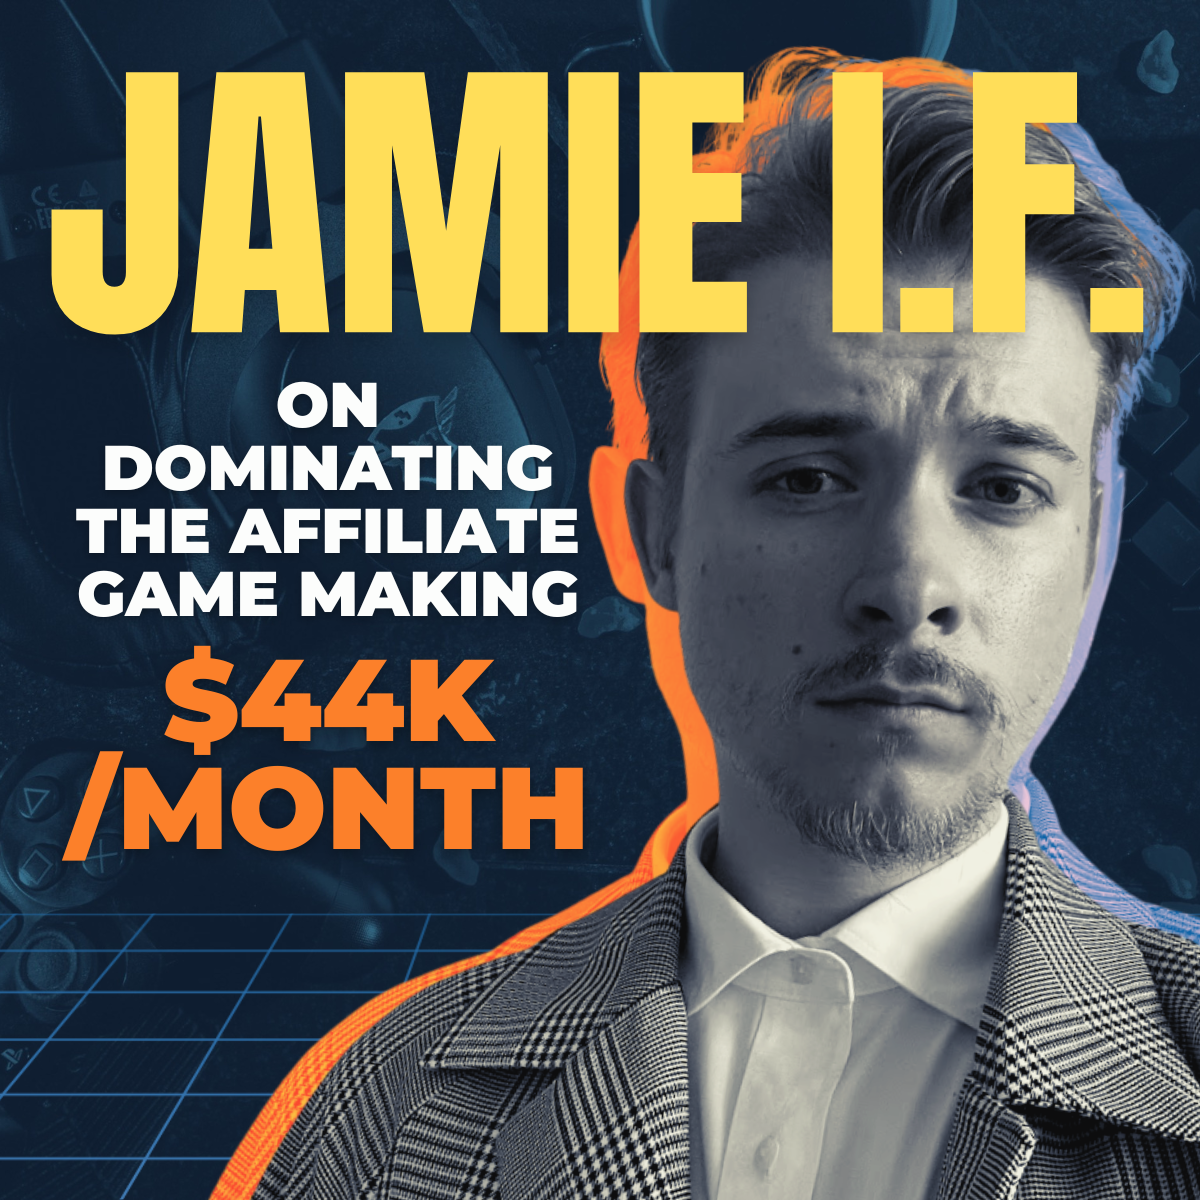 Jamie I.F. on dominating the affiliate game making $44k/month